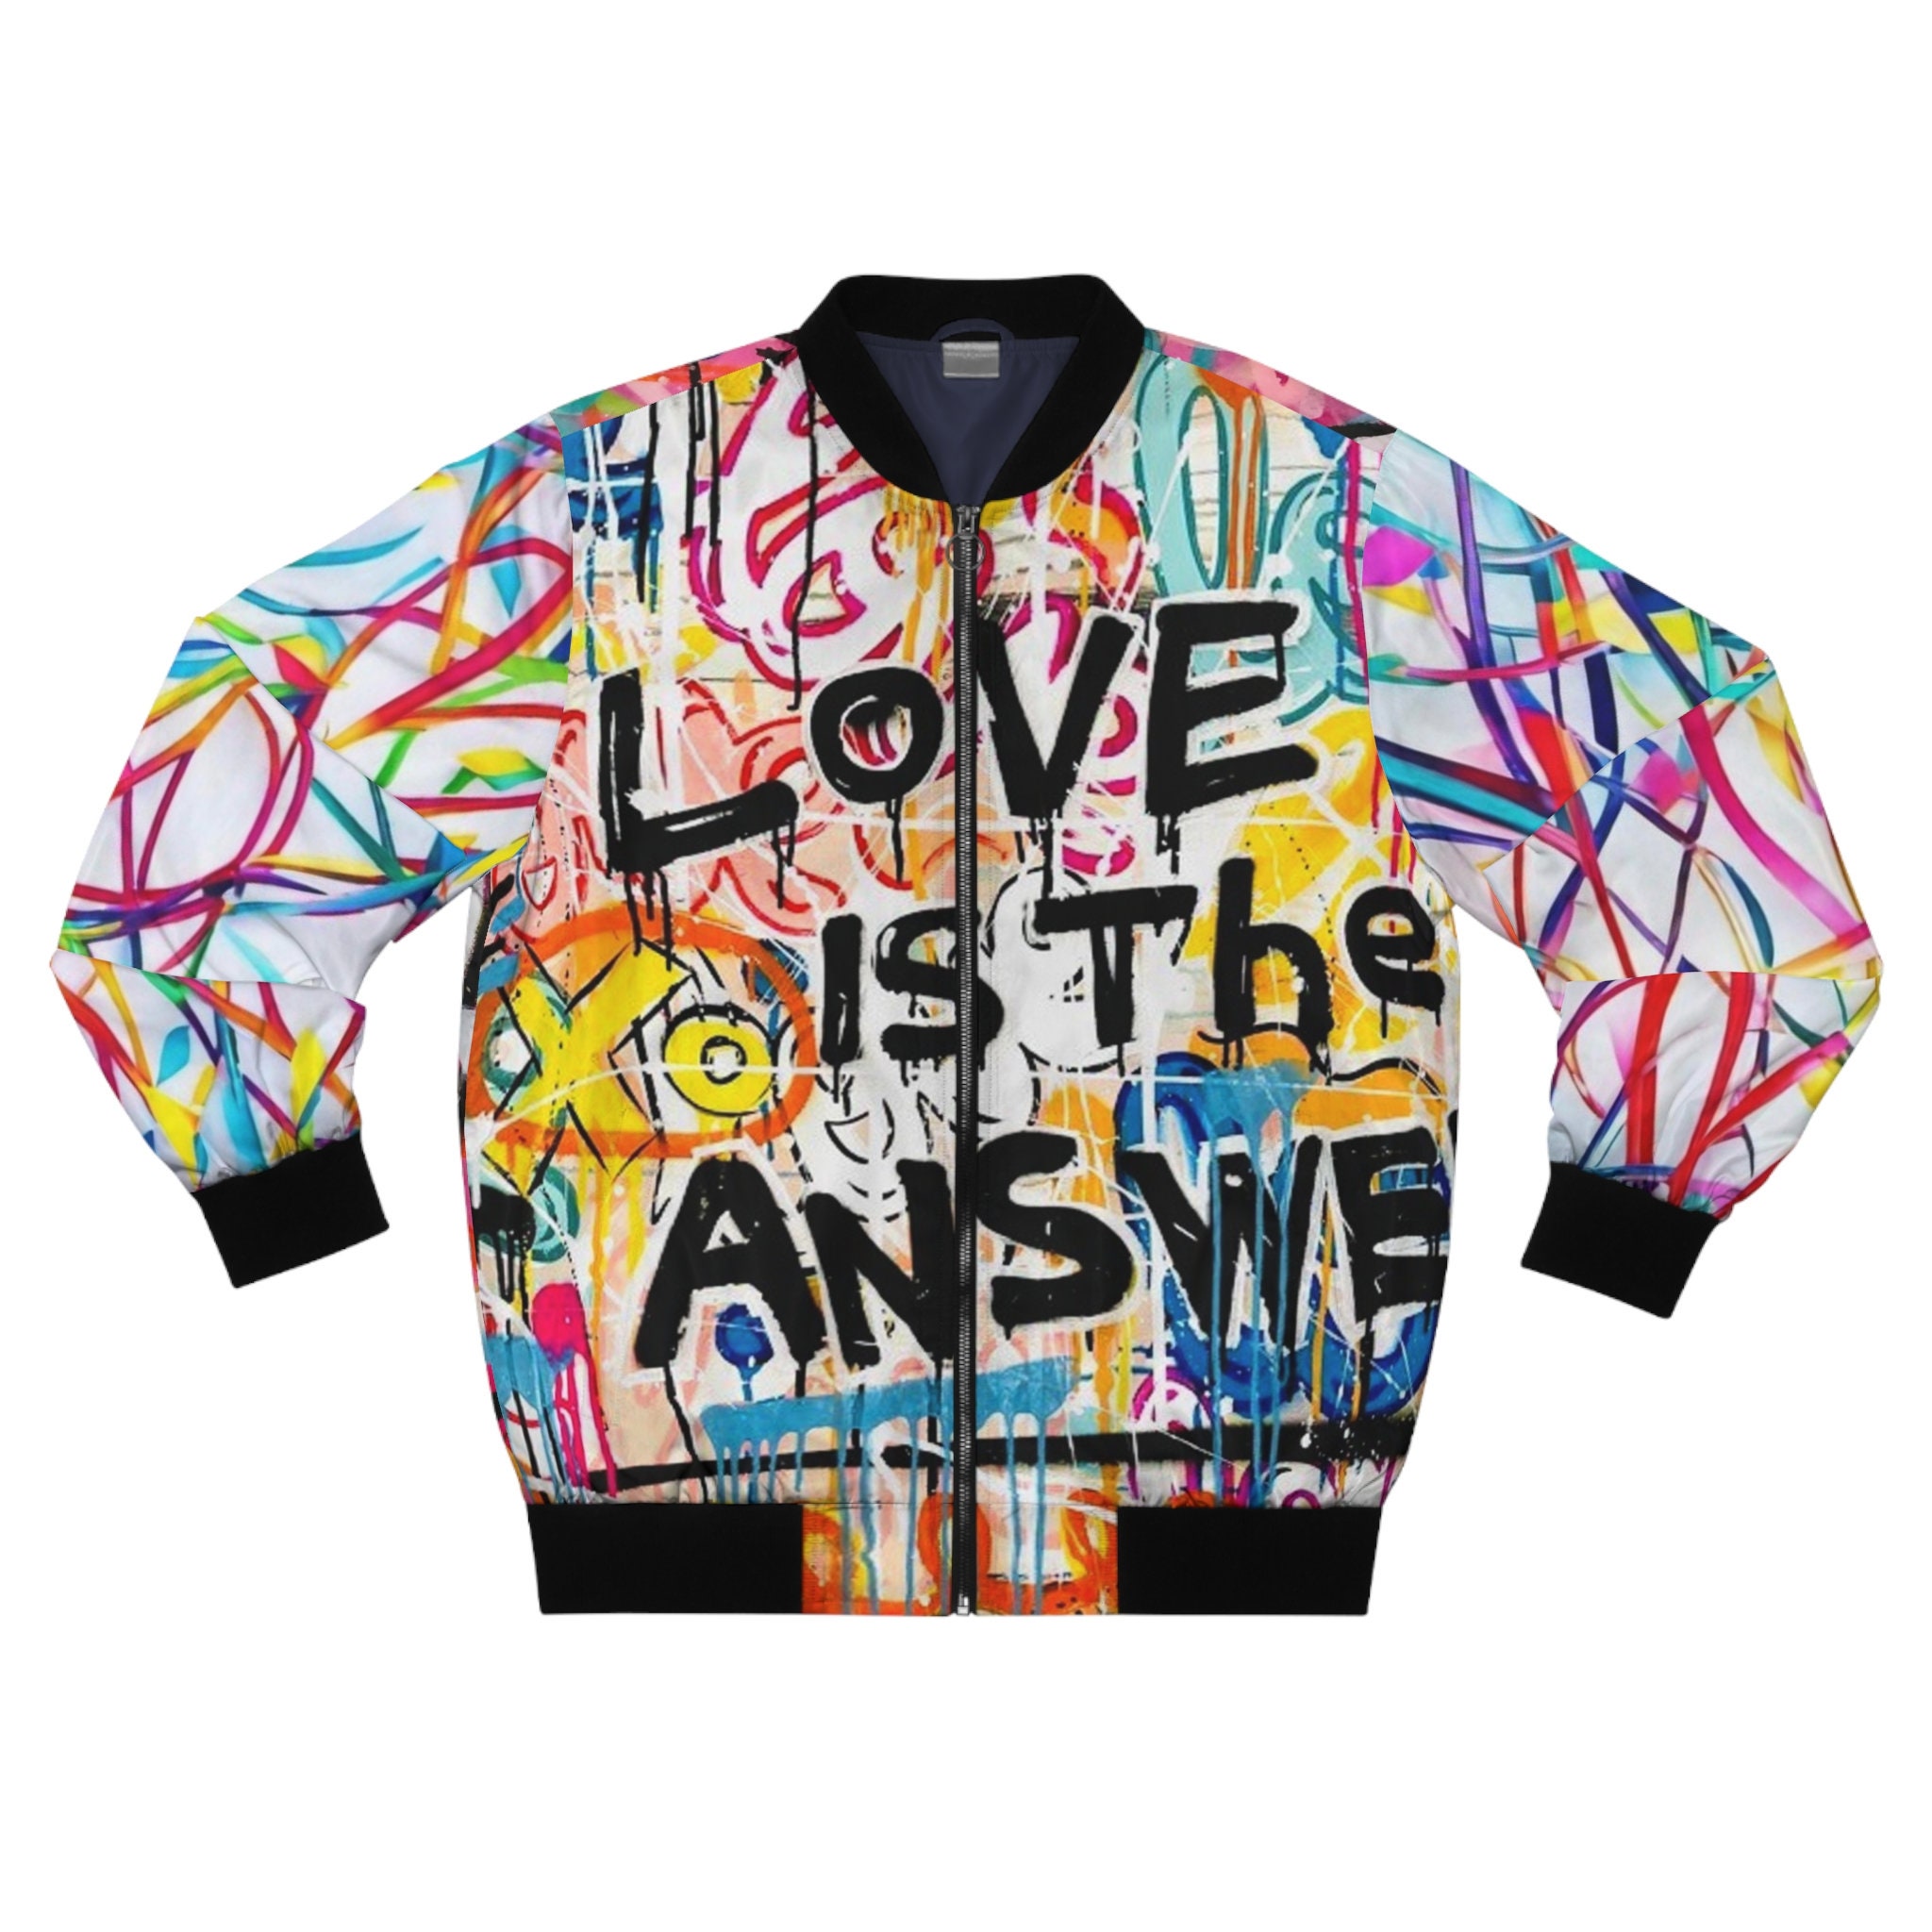 Discover Love Is The Answer Graffiti Men's Bomber Jacket